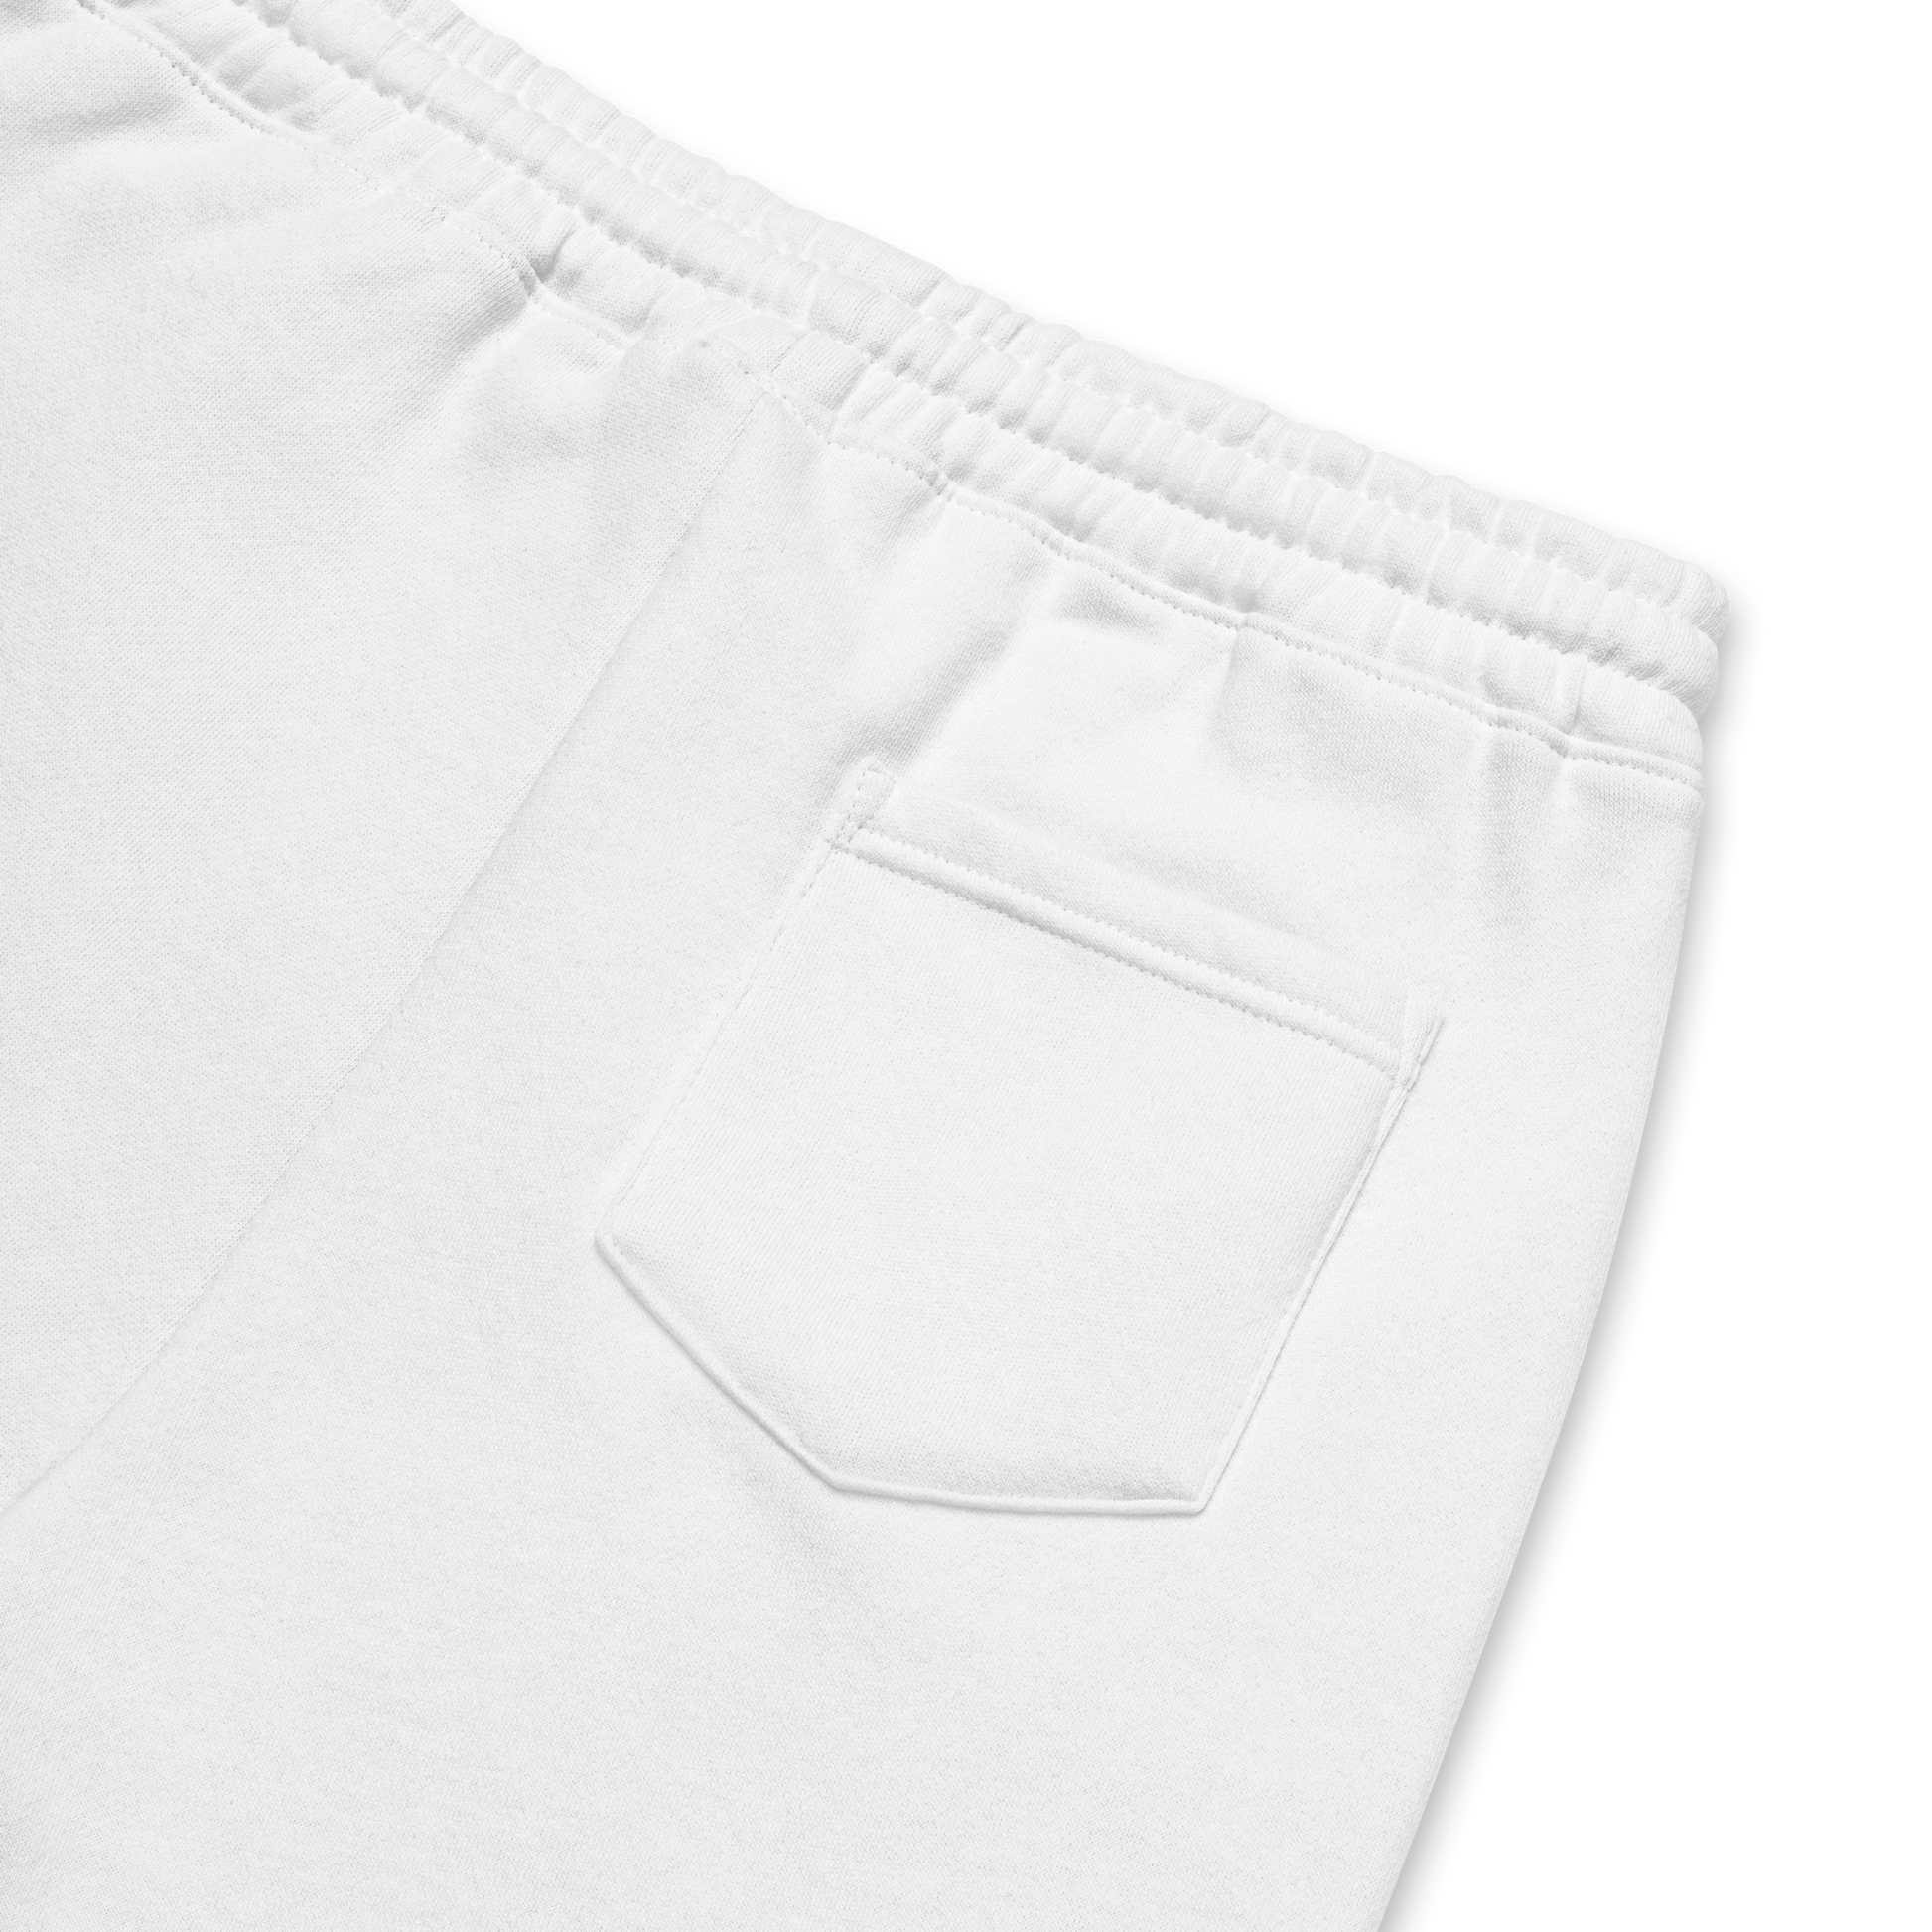 Product Details of a Men's White Fleece Shorts featuring an embroidered Boozy Fox logo on front